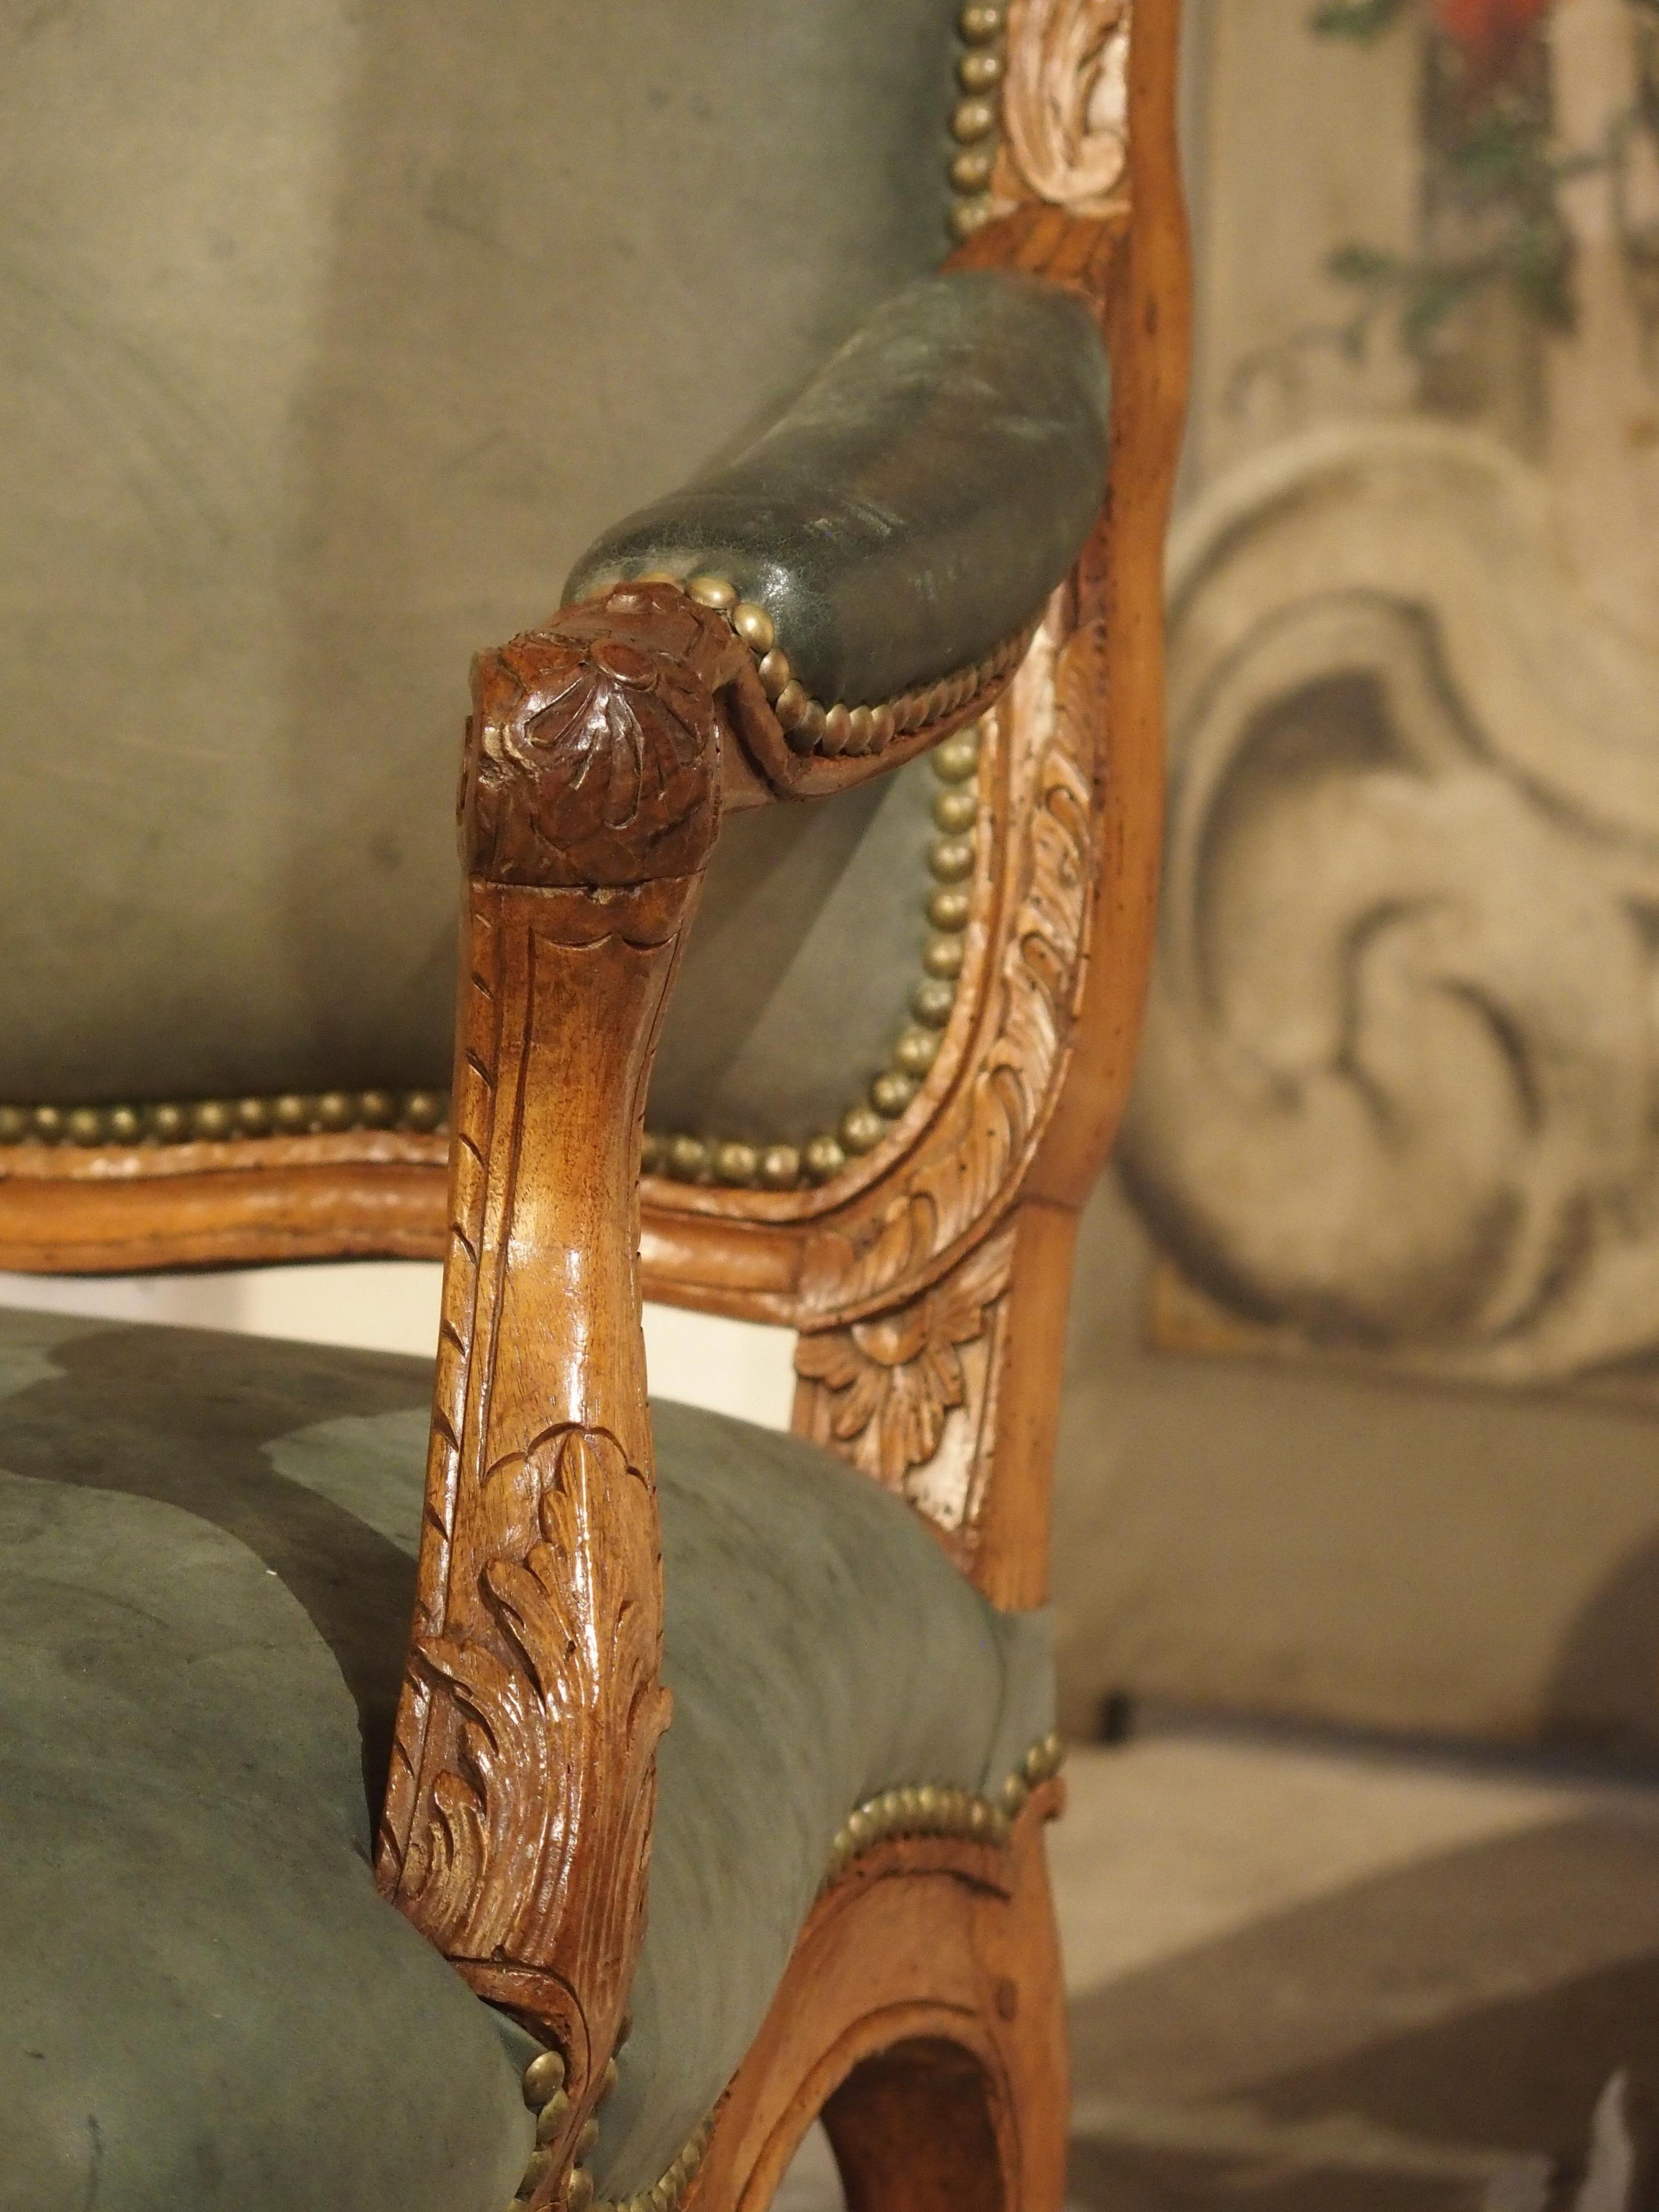 French 18th Century Walnut Wood Fauteuil by Nicolas Foliot, Furniture Maker to the King